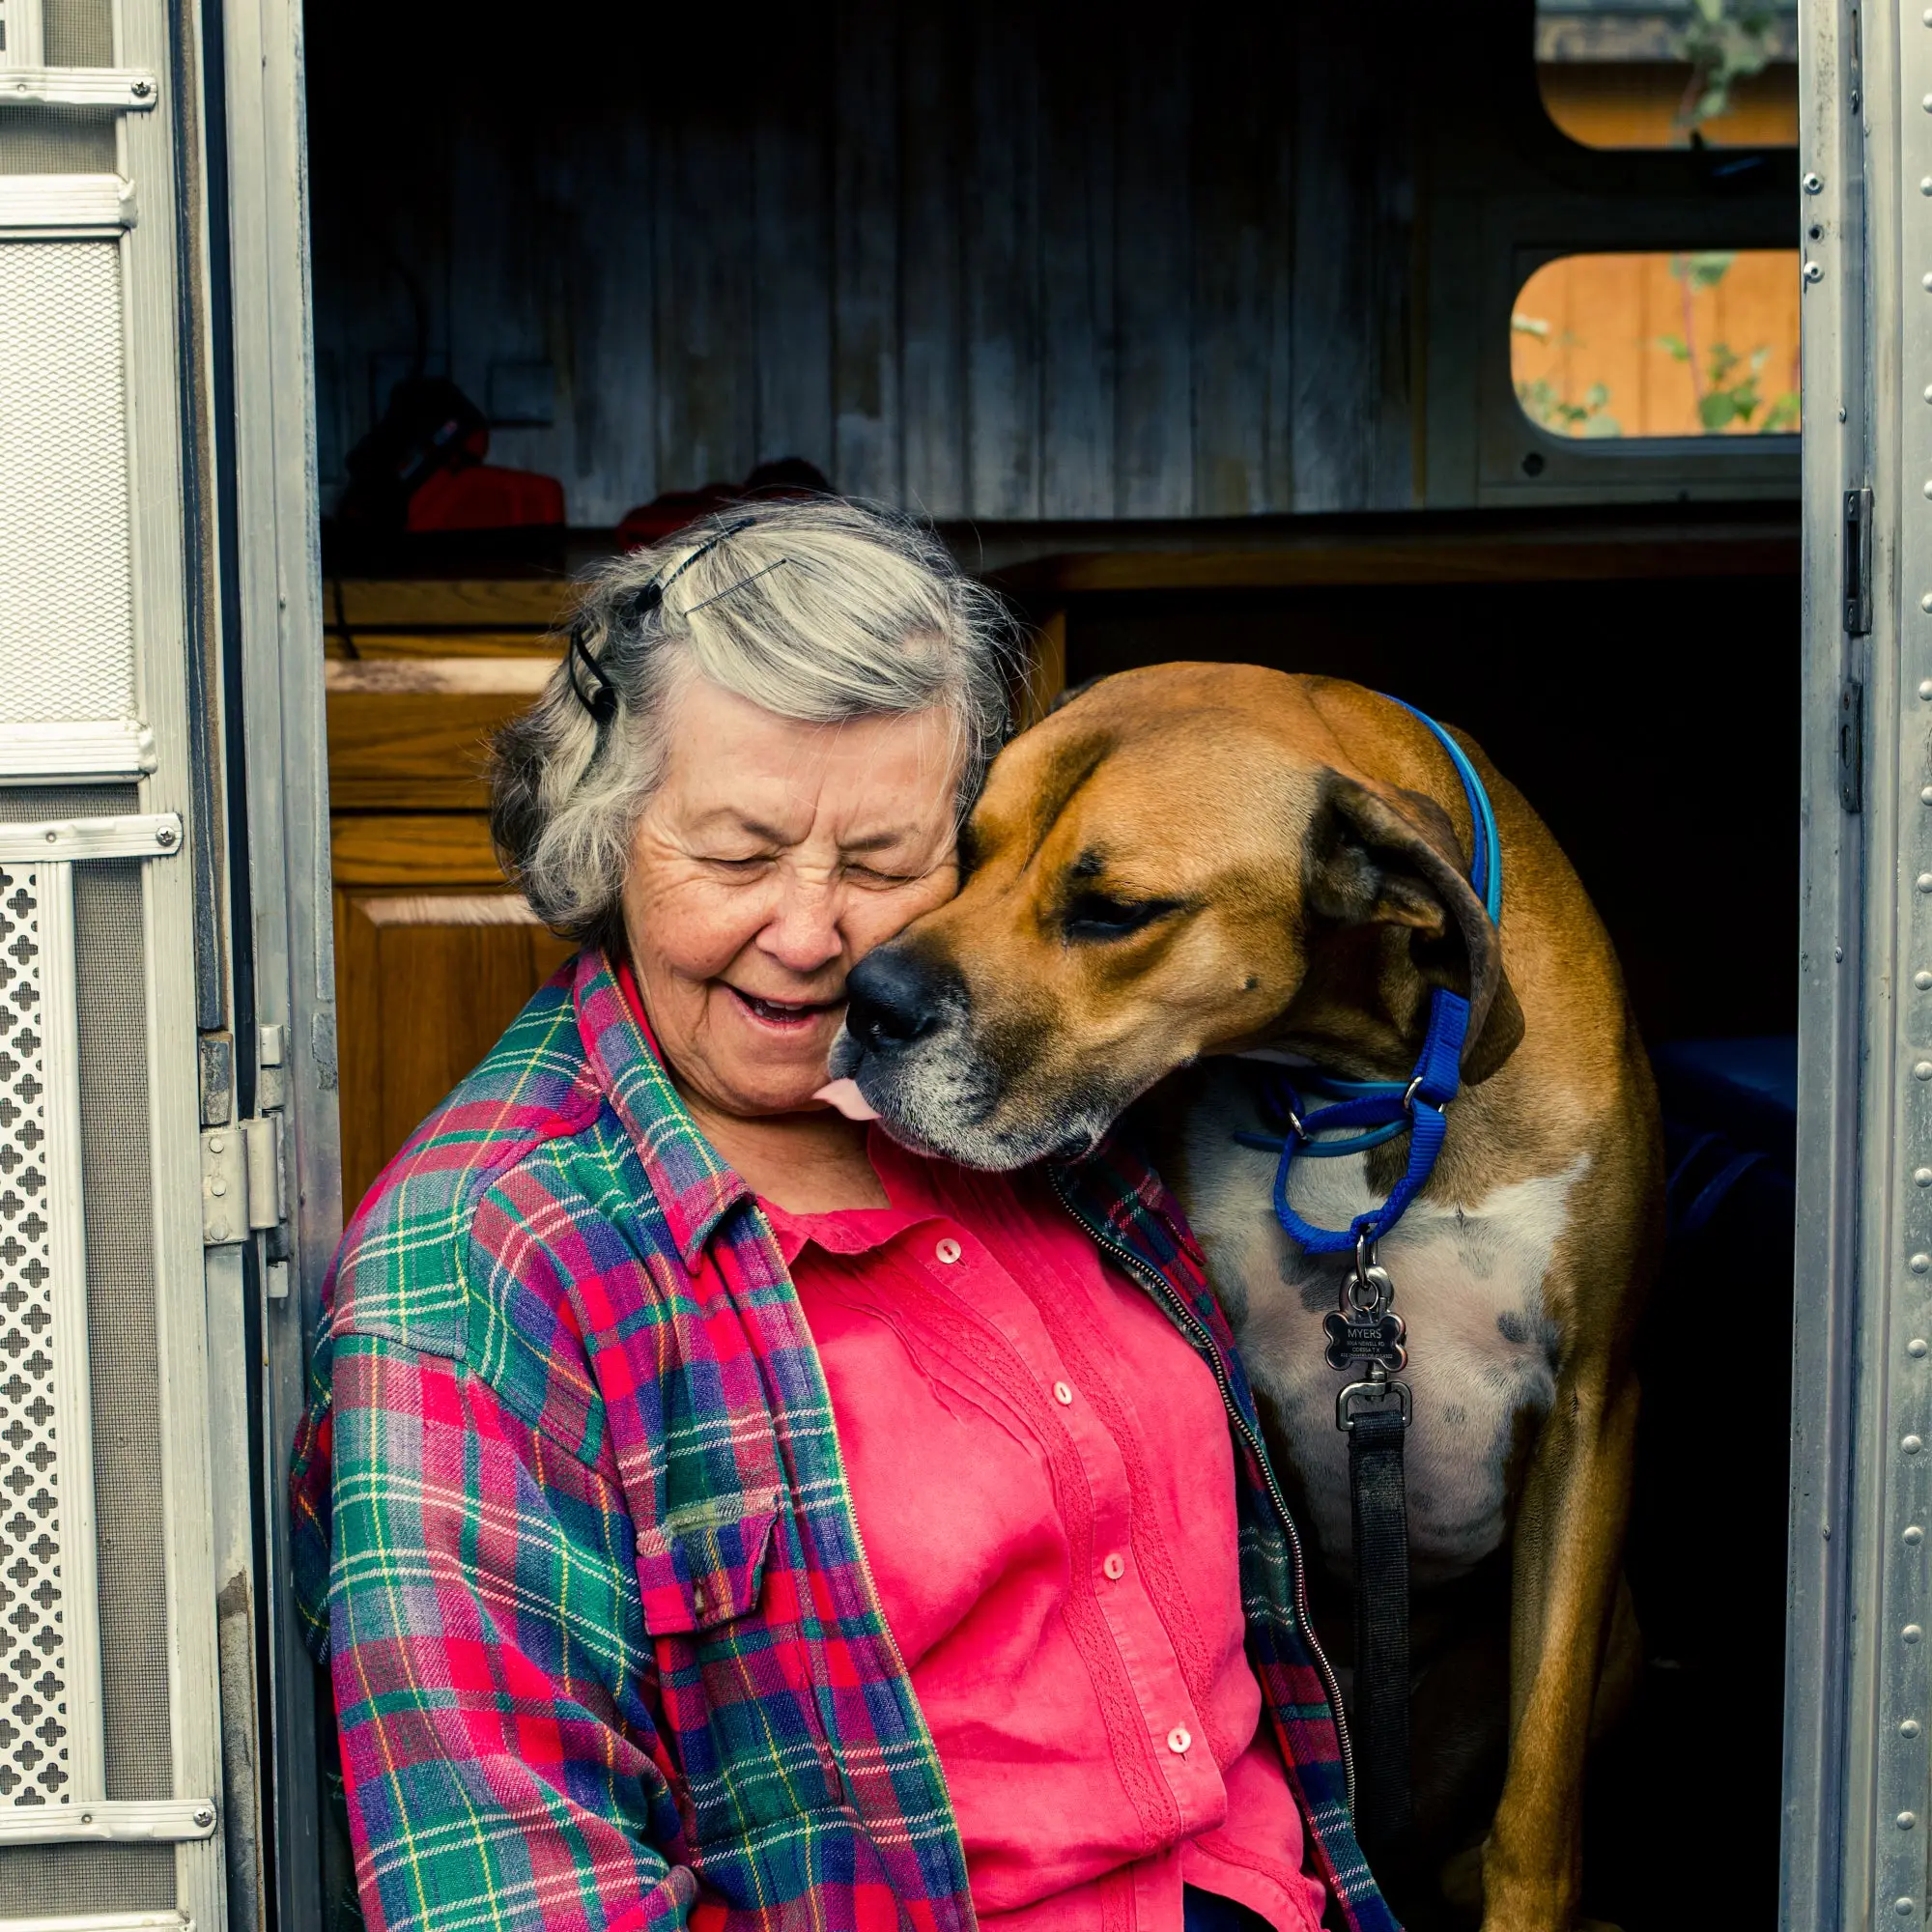 Older women being licked in the face by a dog. 